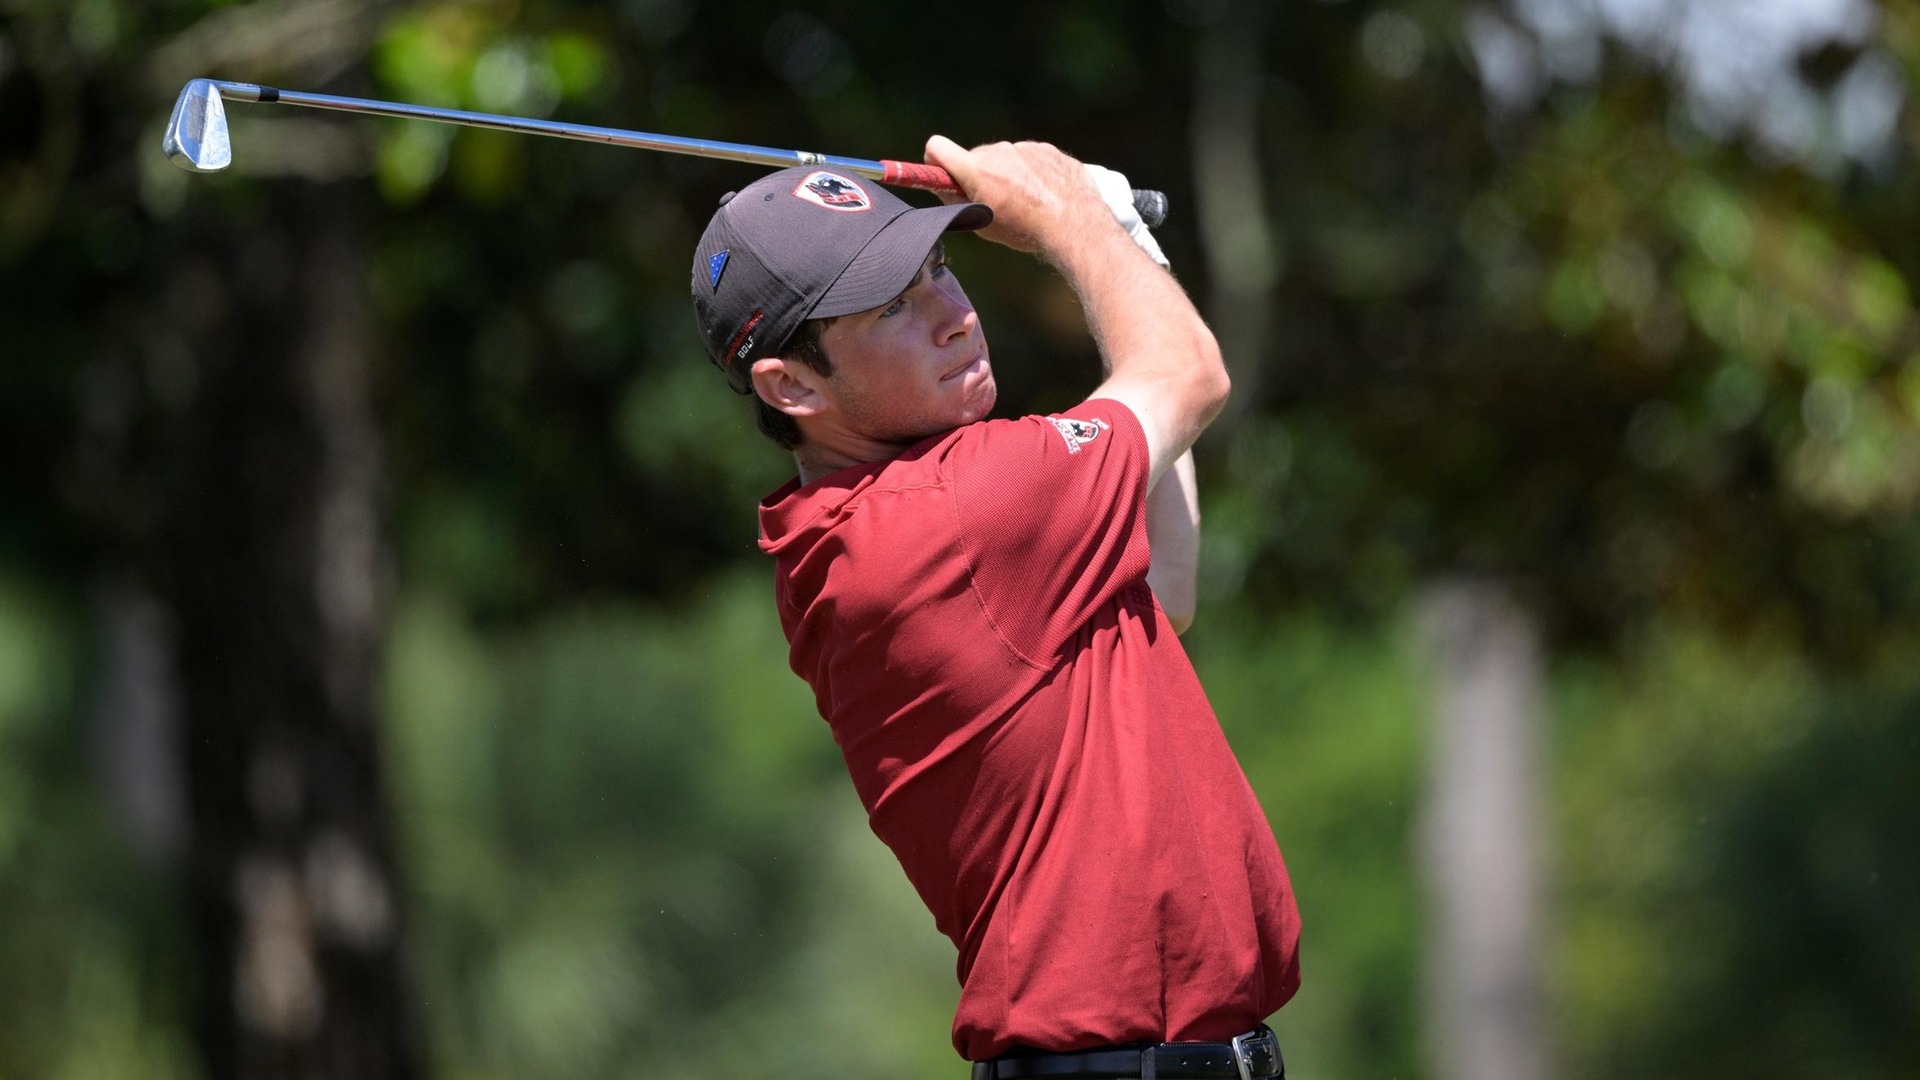 Will Knauth, a 2022 CMU Graduate, Making His First PGA TOUR Start This Week at the AT&T Byron Nelson